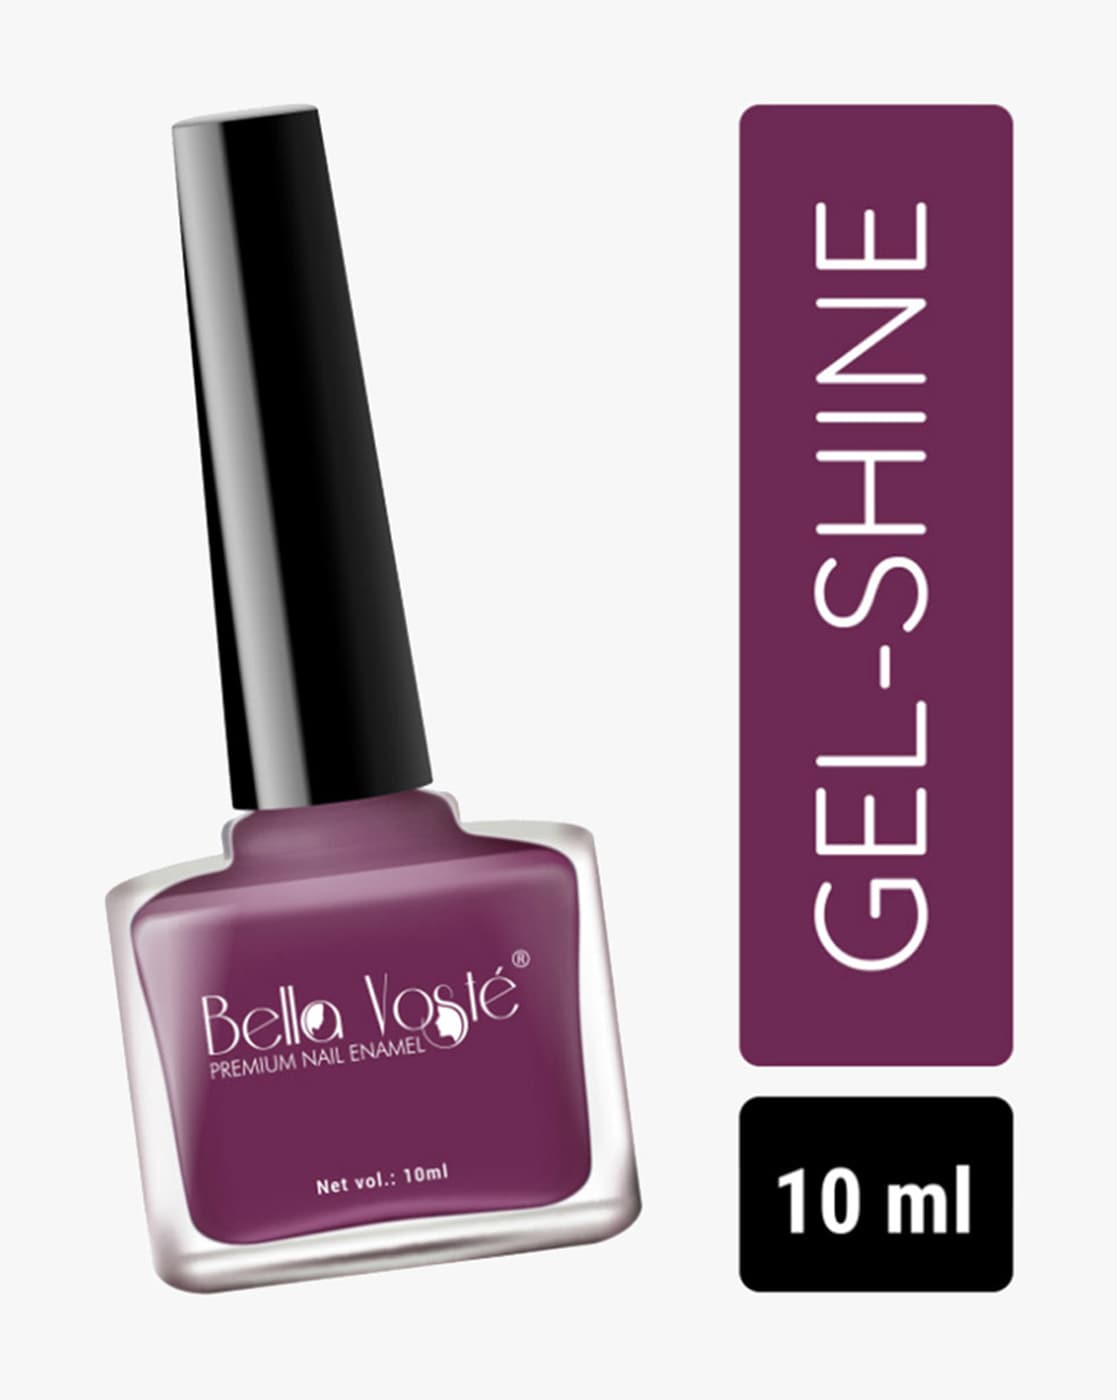 Bella Voste MATTE Nail Polish| Quick Drying Formula| Cruelty Free| Paraben  Free & No Harmful Chemicals| Vegan | Lasts for 7 Days & more|Chip Resistant  | DEEP MATT Formula with Smooth &